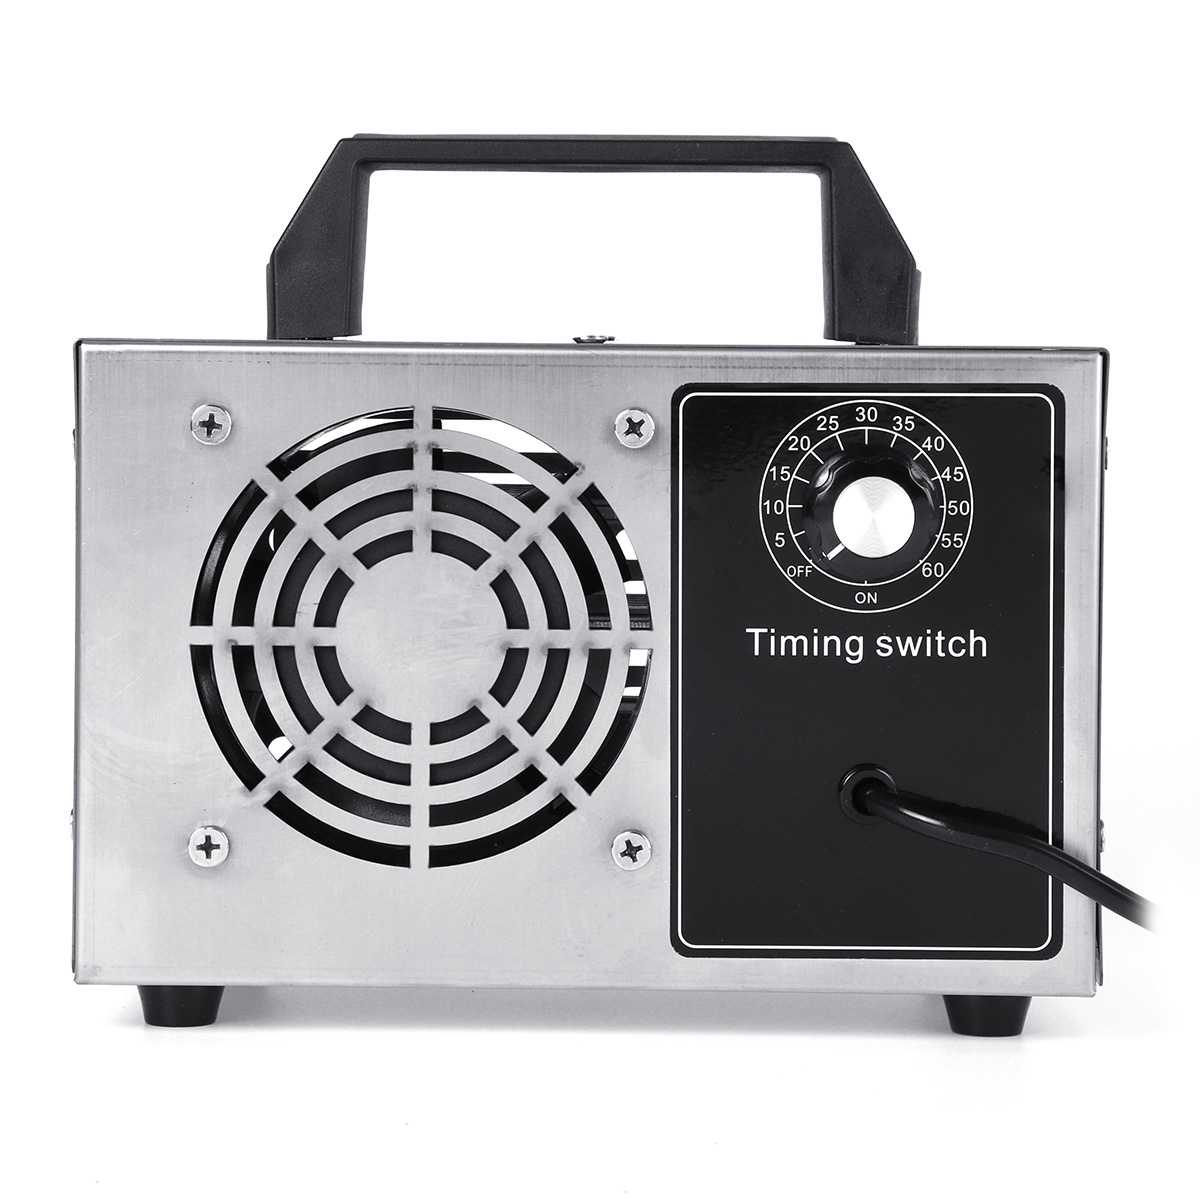 220V-Ozone-Generator-Commercial-Long-Life-Timing-Purifier-Air-Cleaner-Deodorizer-1710921-4